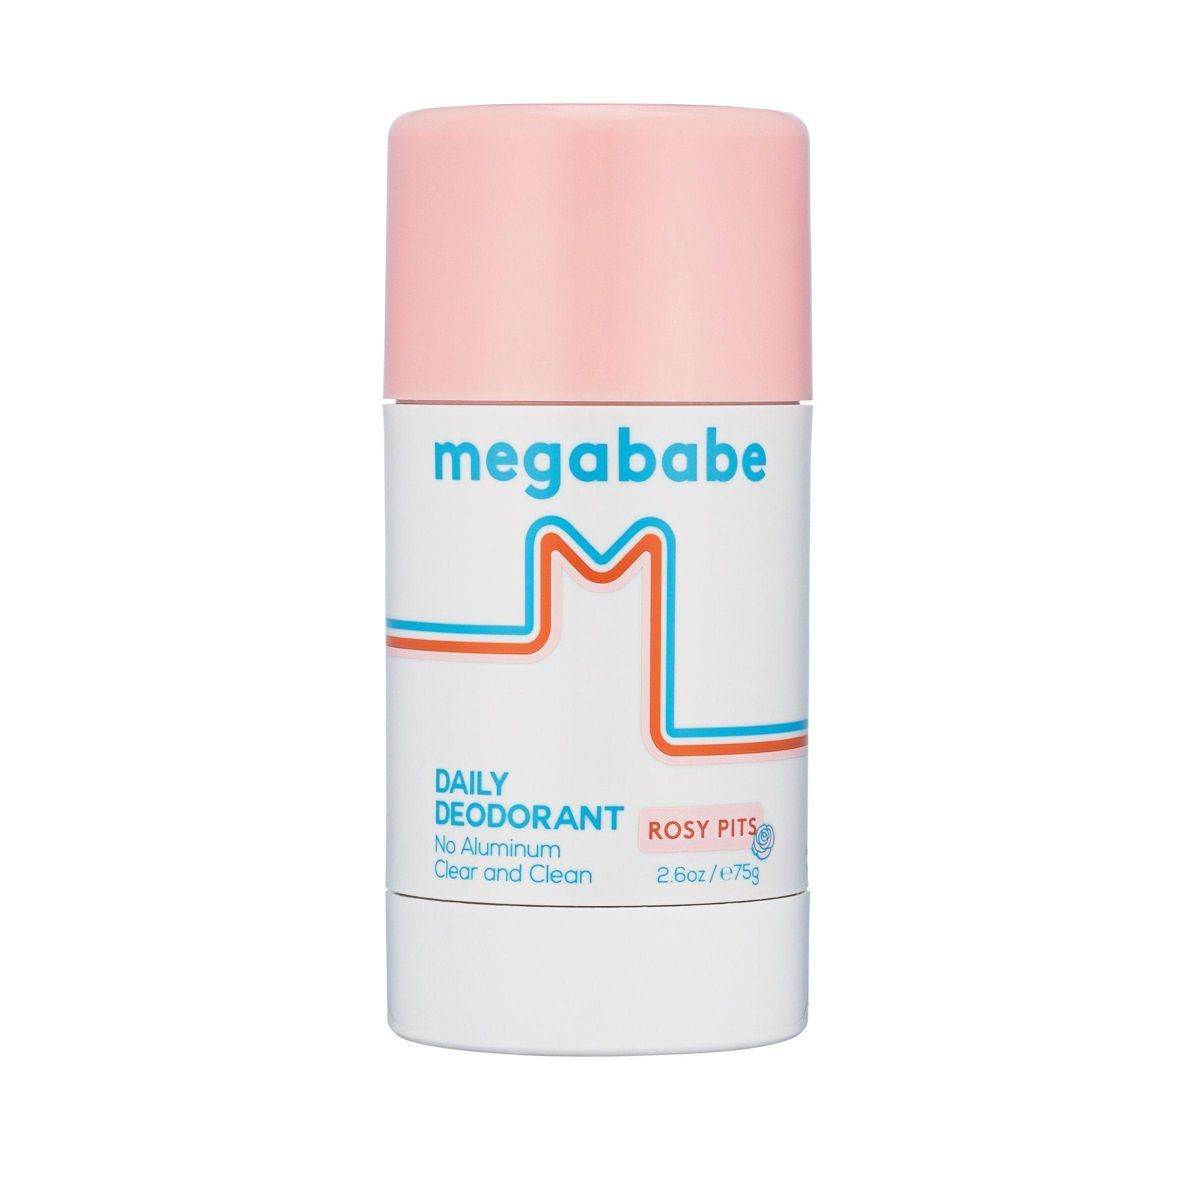 Megababe Rosy Pits Daily Deodorant - 2.6oz | Target